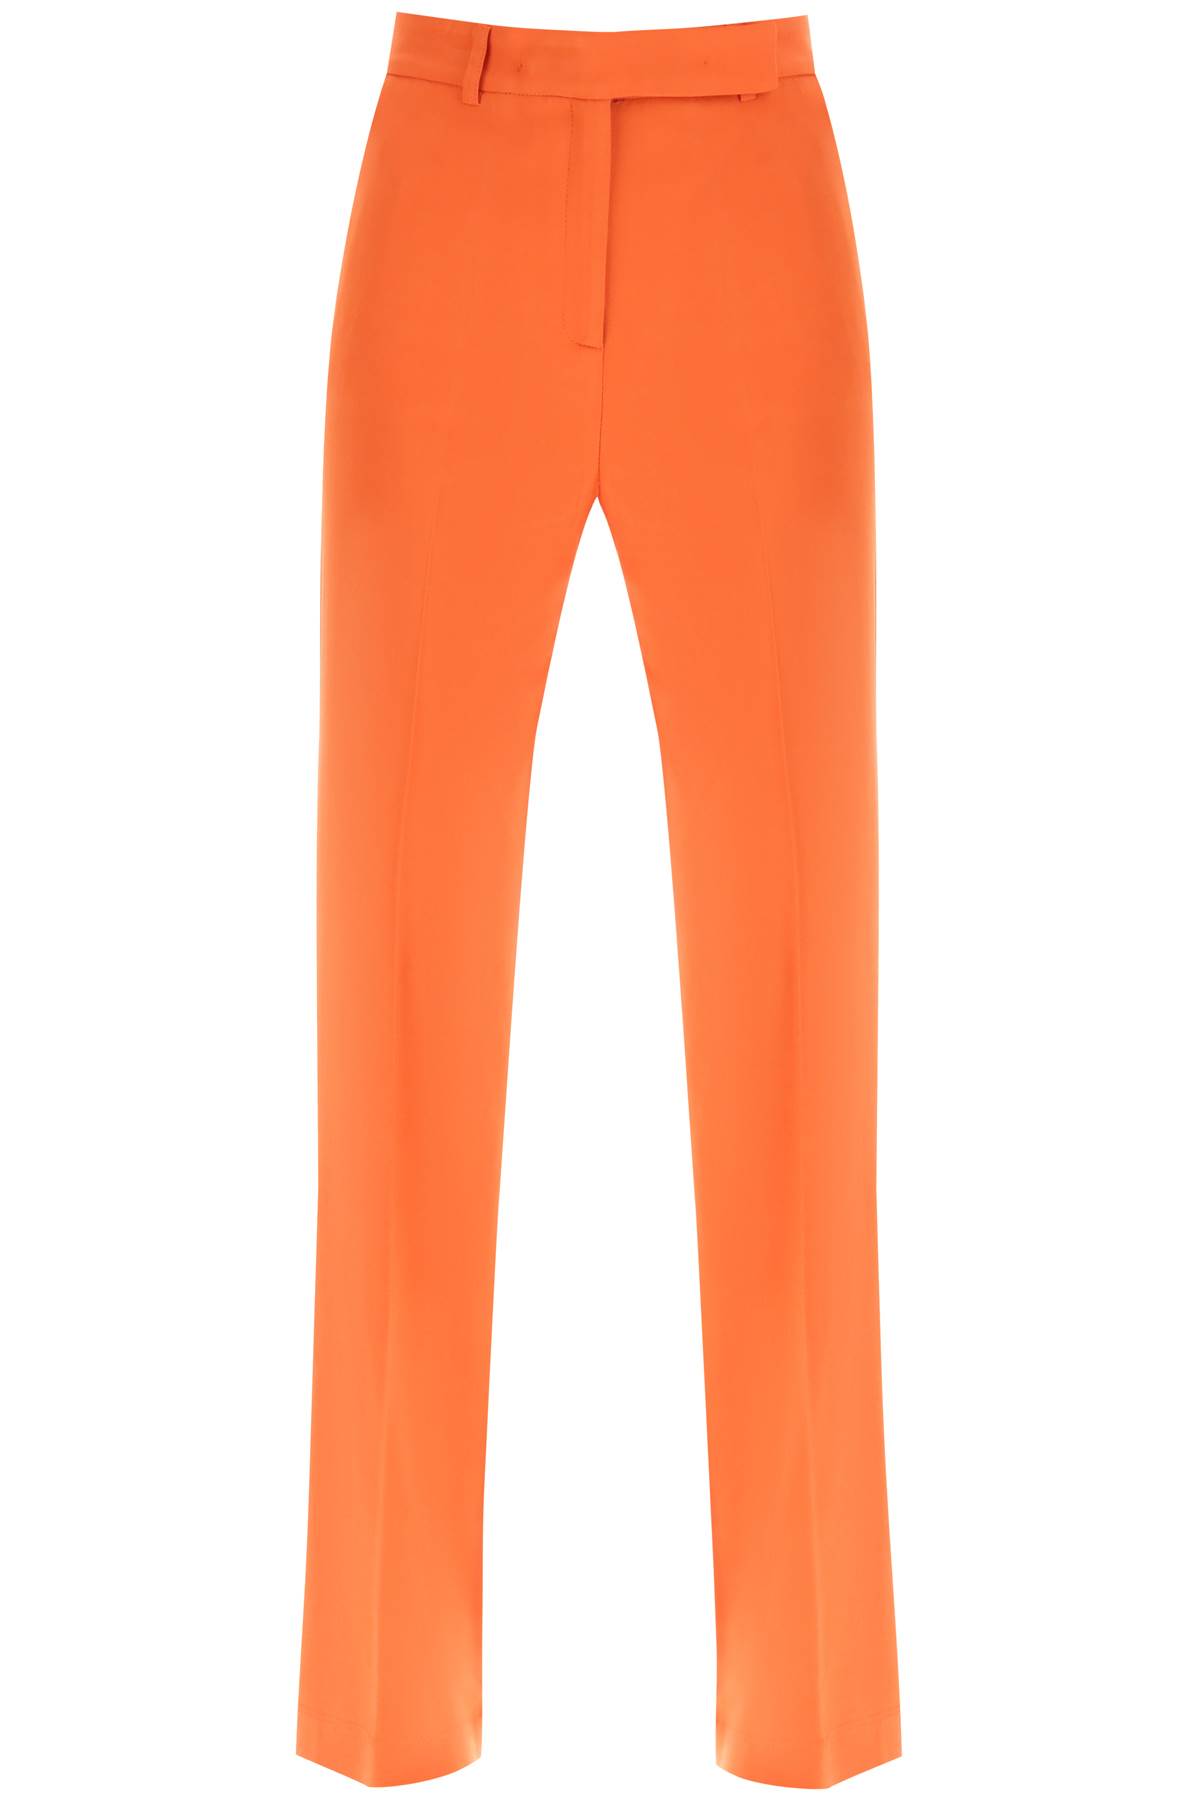 Off-White - Teen Girls Coral Orange Flared Trousers | Childrensalon Outlet